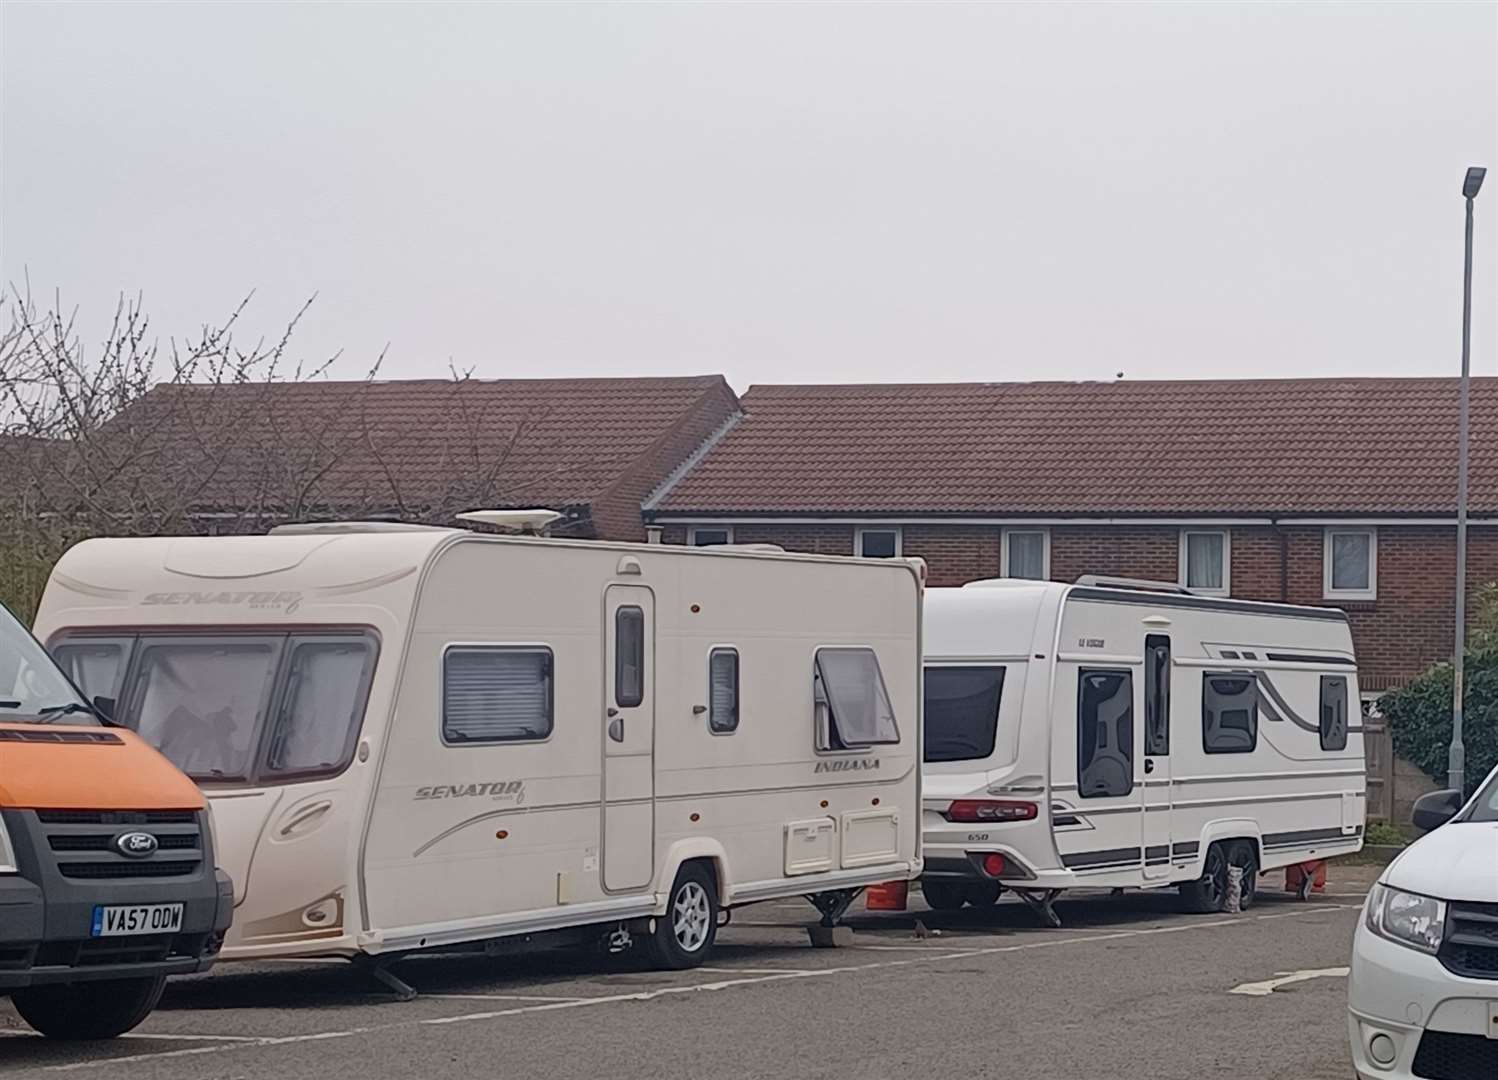 Some of the caravans that are in the car park off the A2 in Rainham